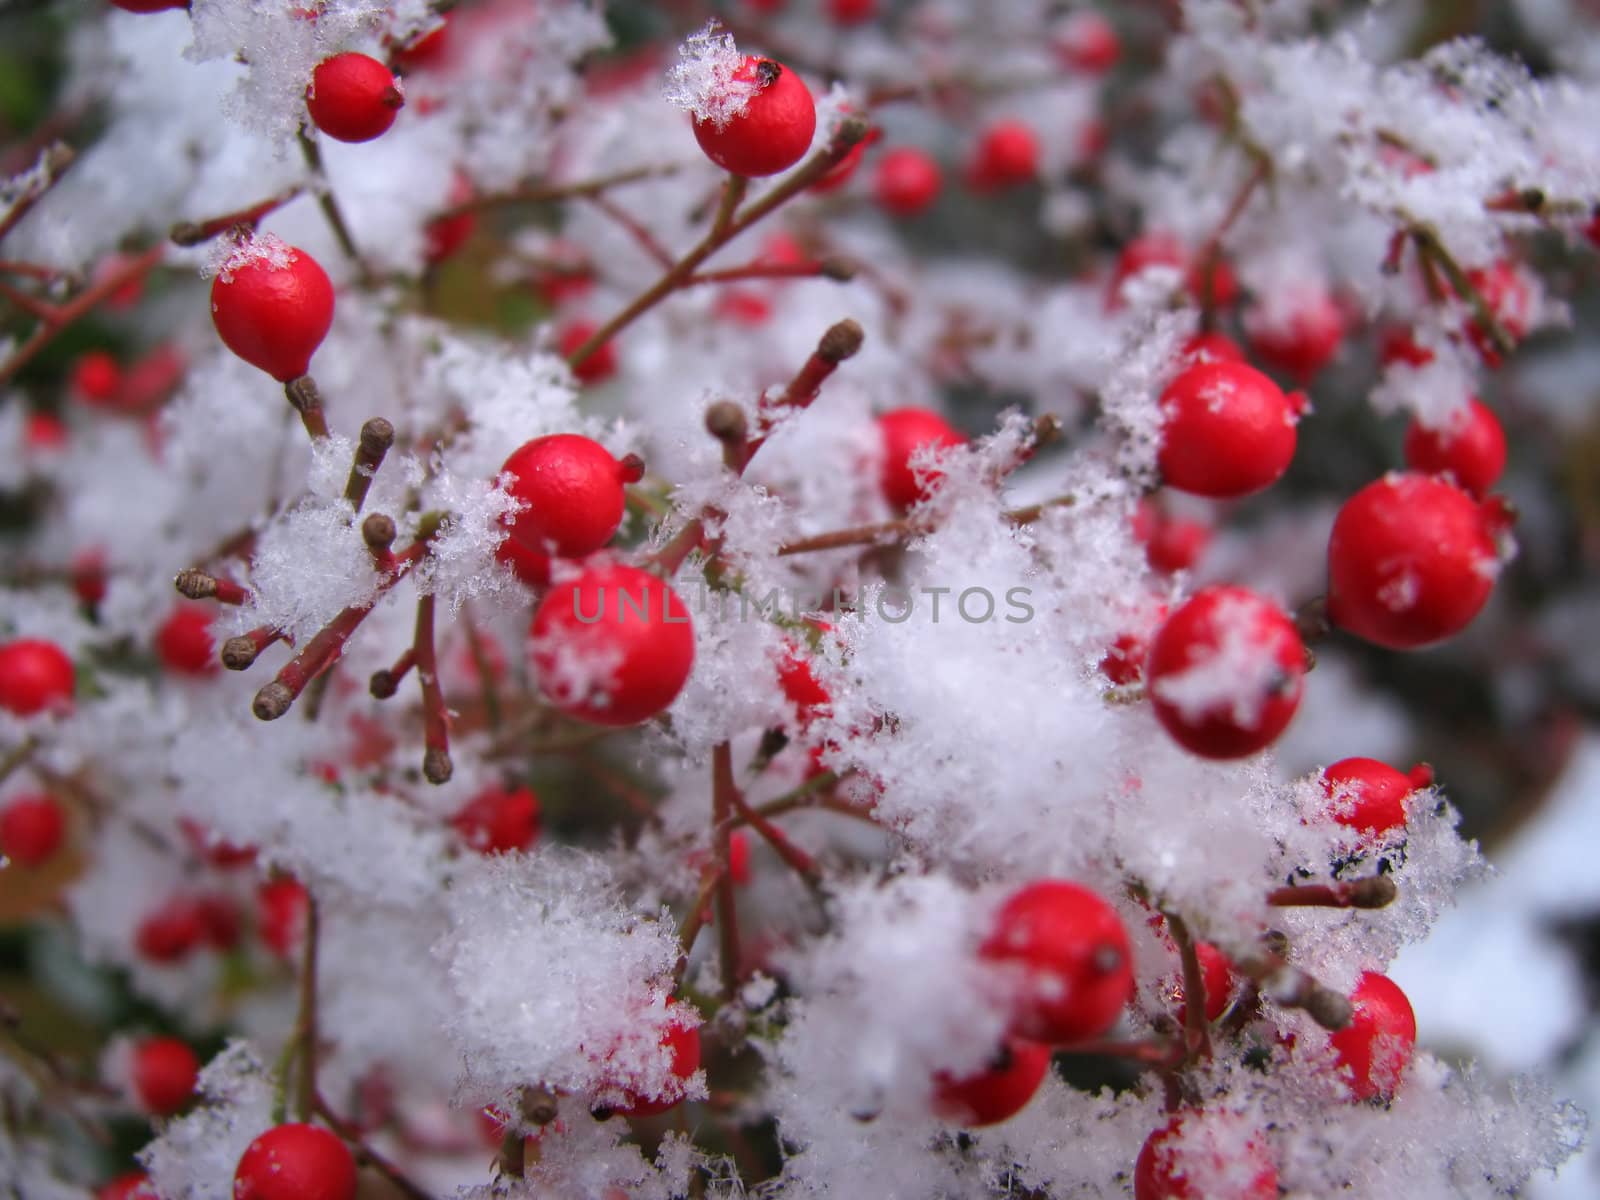 Snow Covered Red Berries is a macro shot of red berries and pure white snow showing nice detail.
